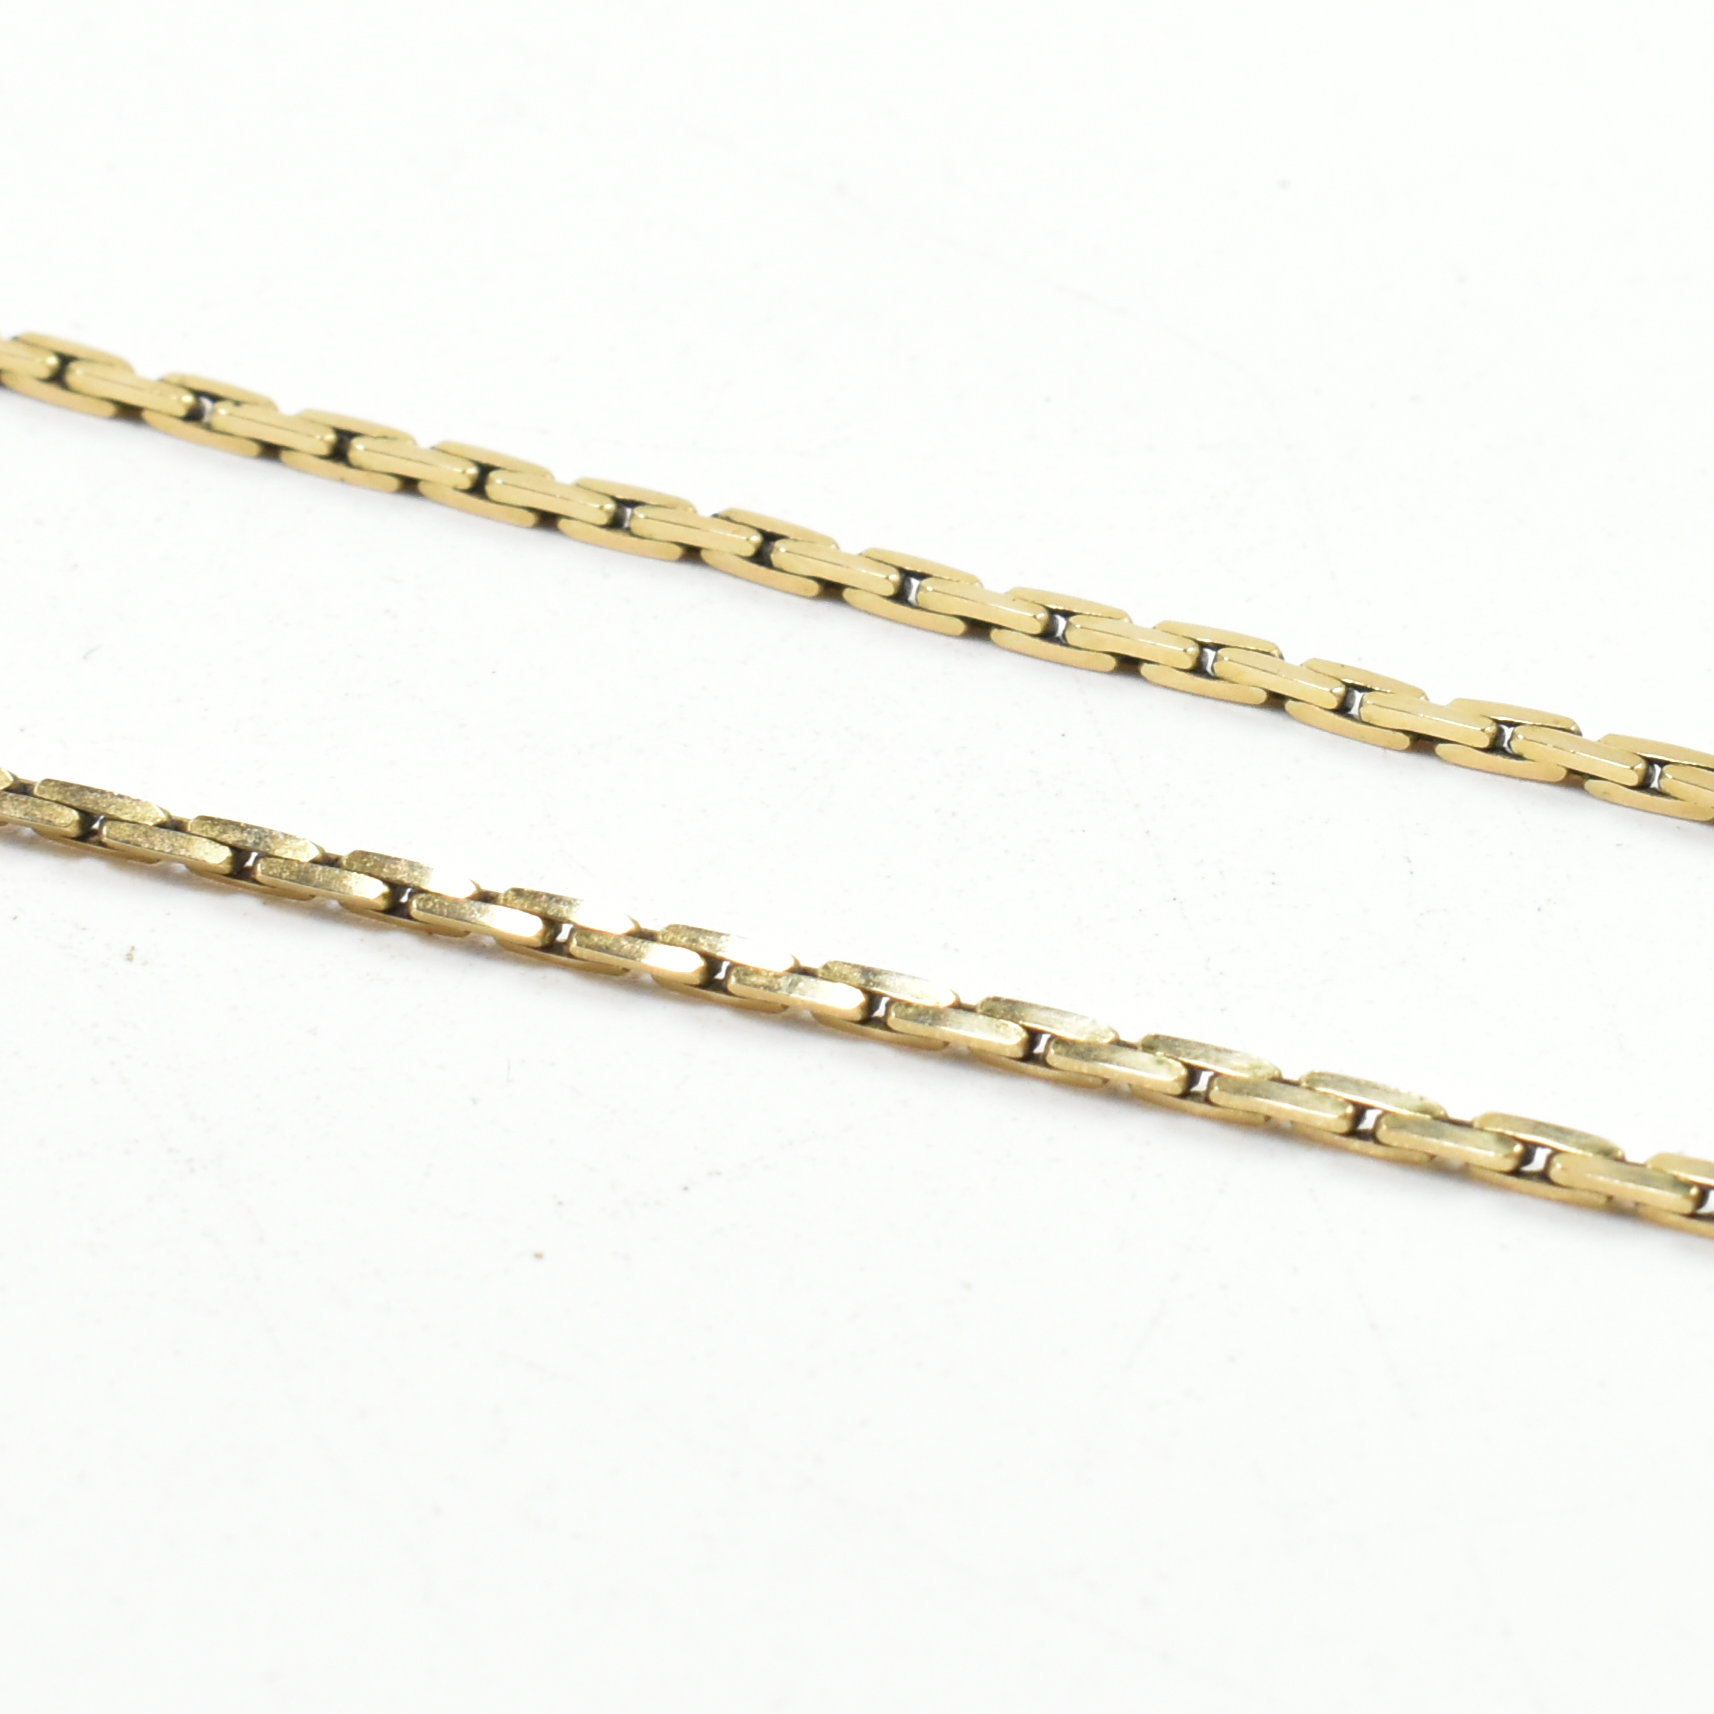 HALLMARKED 9CT GOLD FANCY FLAT LINK CHAIN - Image 3 of 5